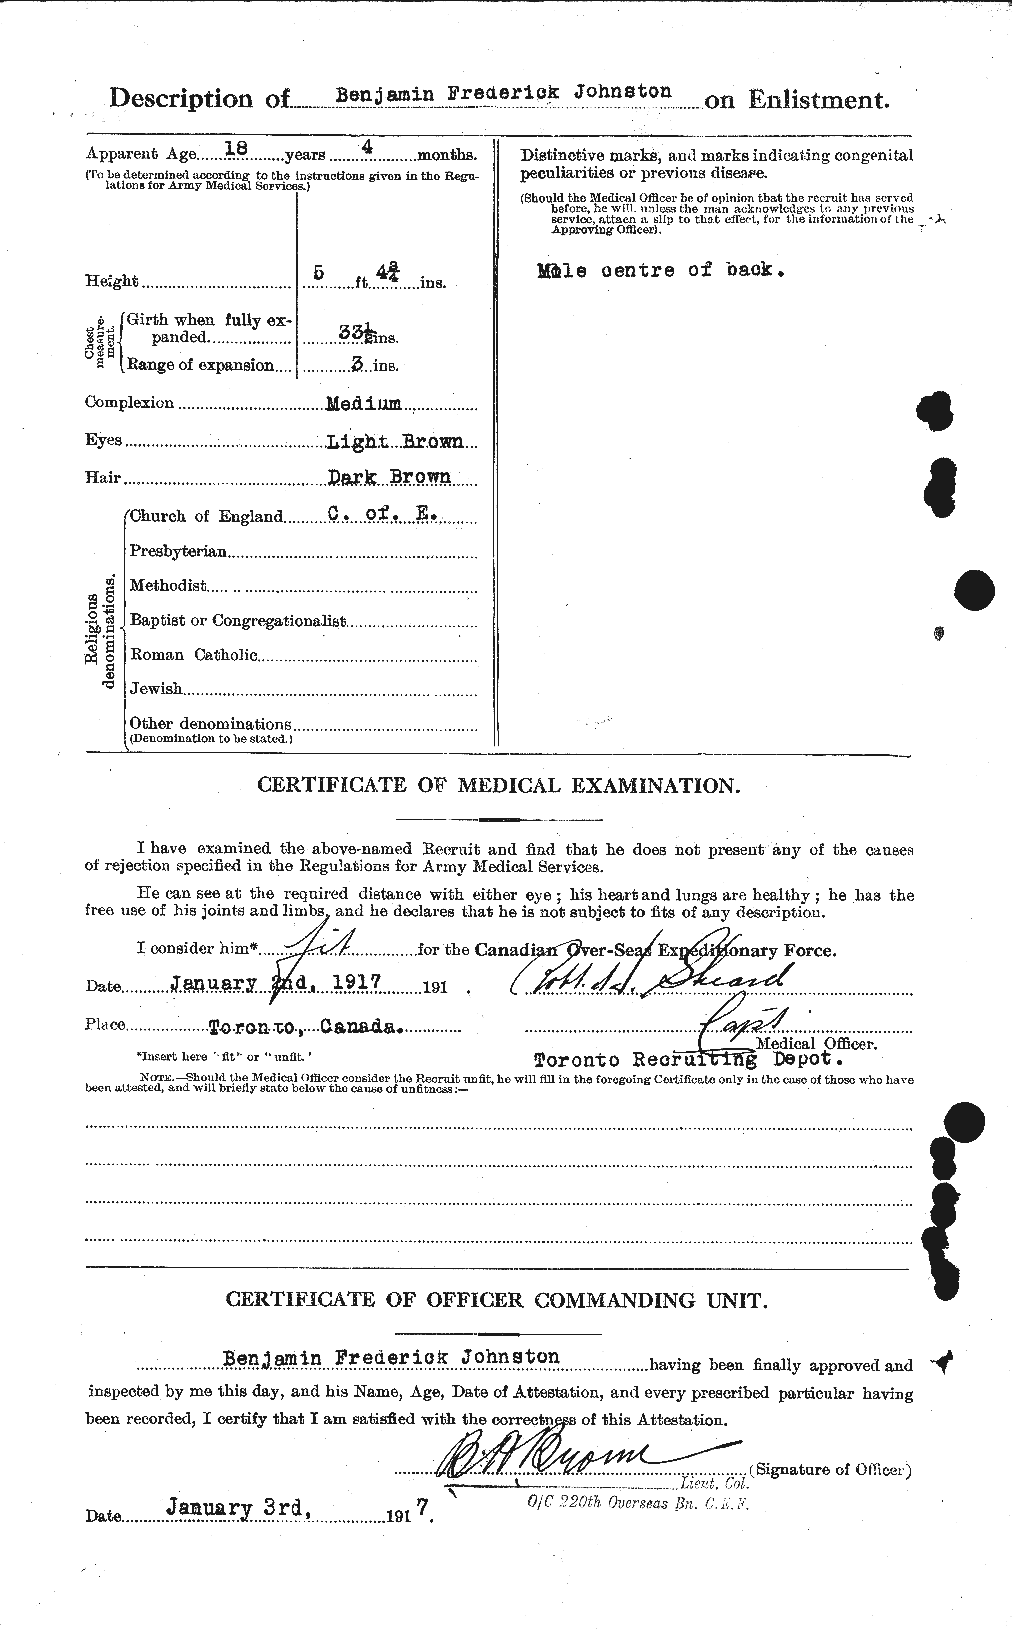 Personnel Records of the First World War - CEF 421066b